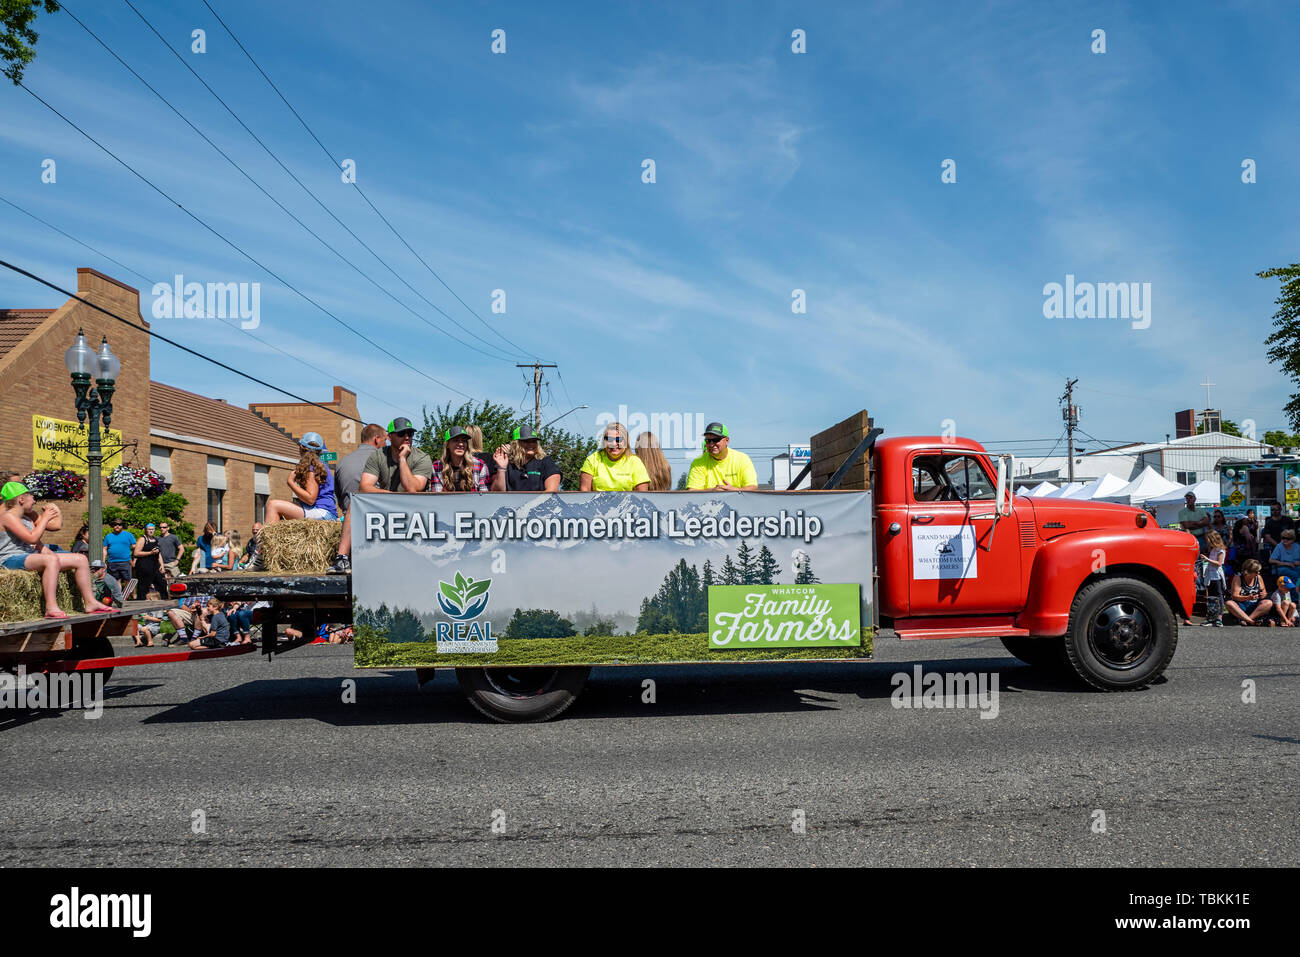 Family Farmers float in the Lynden Farmers Day Parade. Lynden